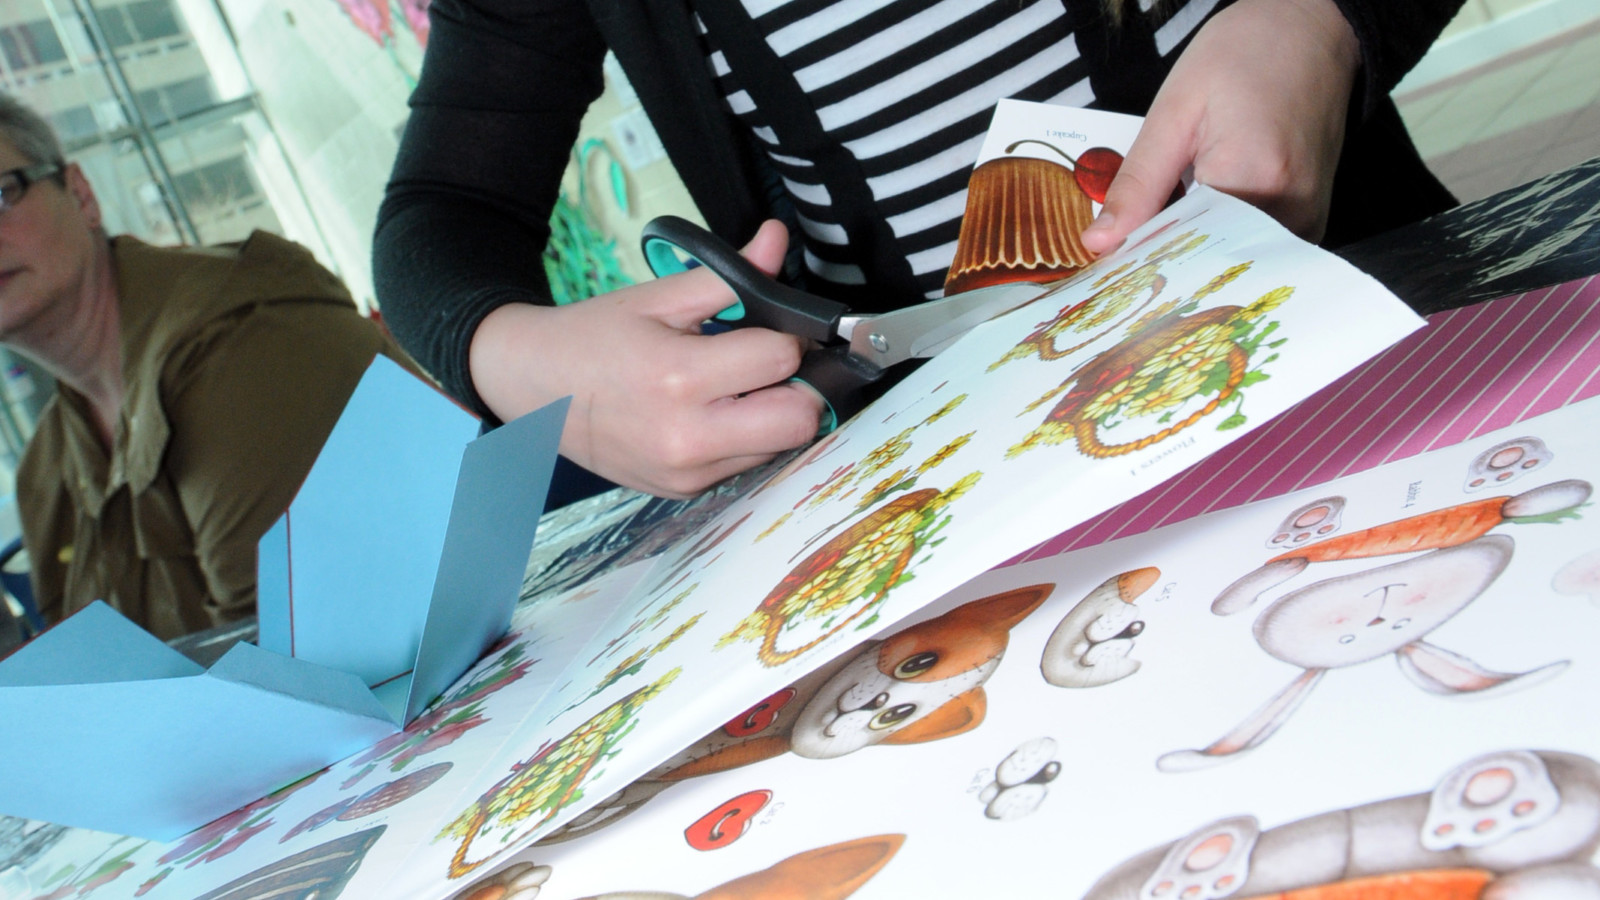 A young person is cutting out cartoon drawings of rabbits and dogs from pieces of white card.